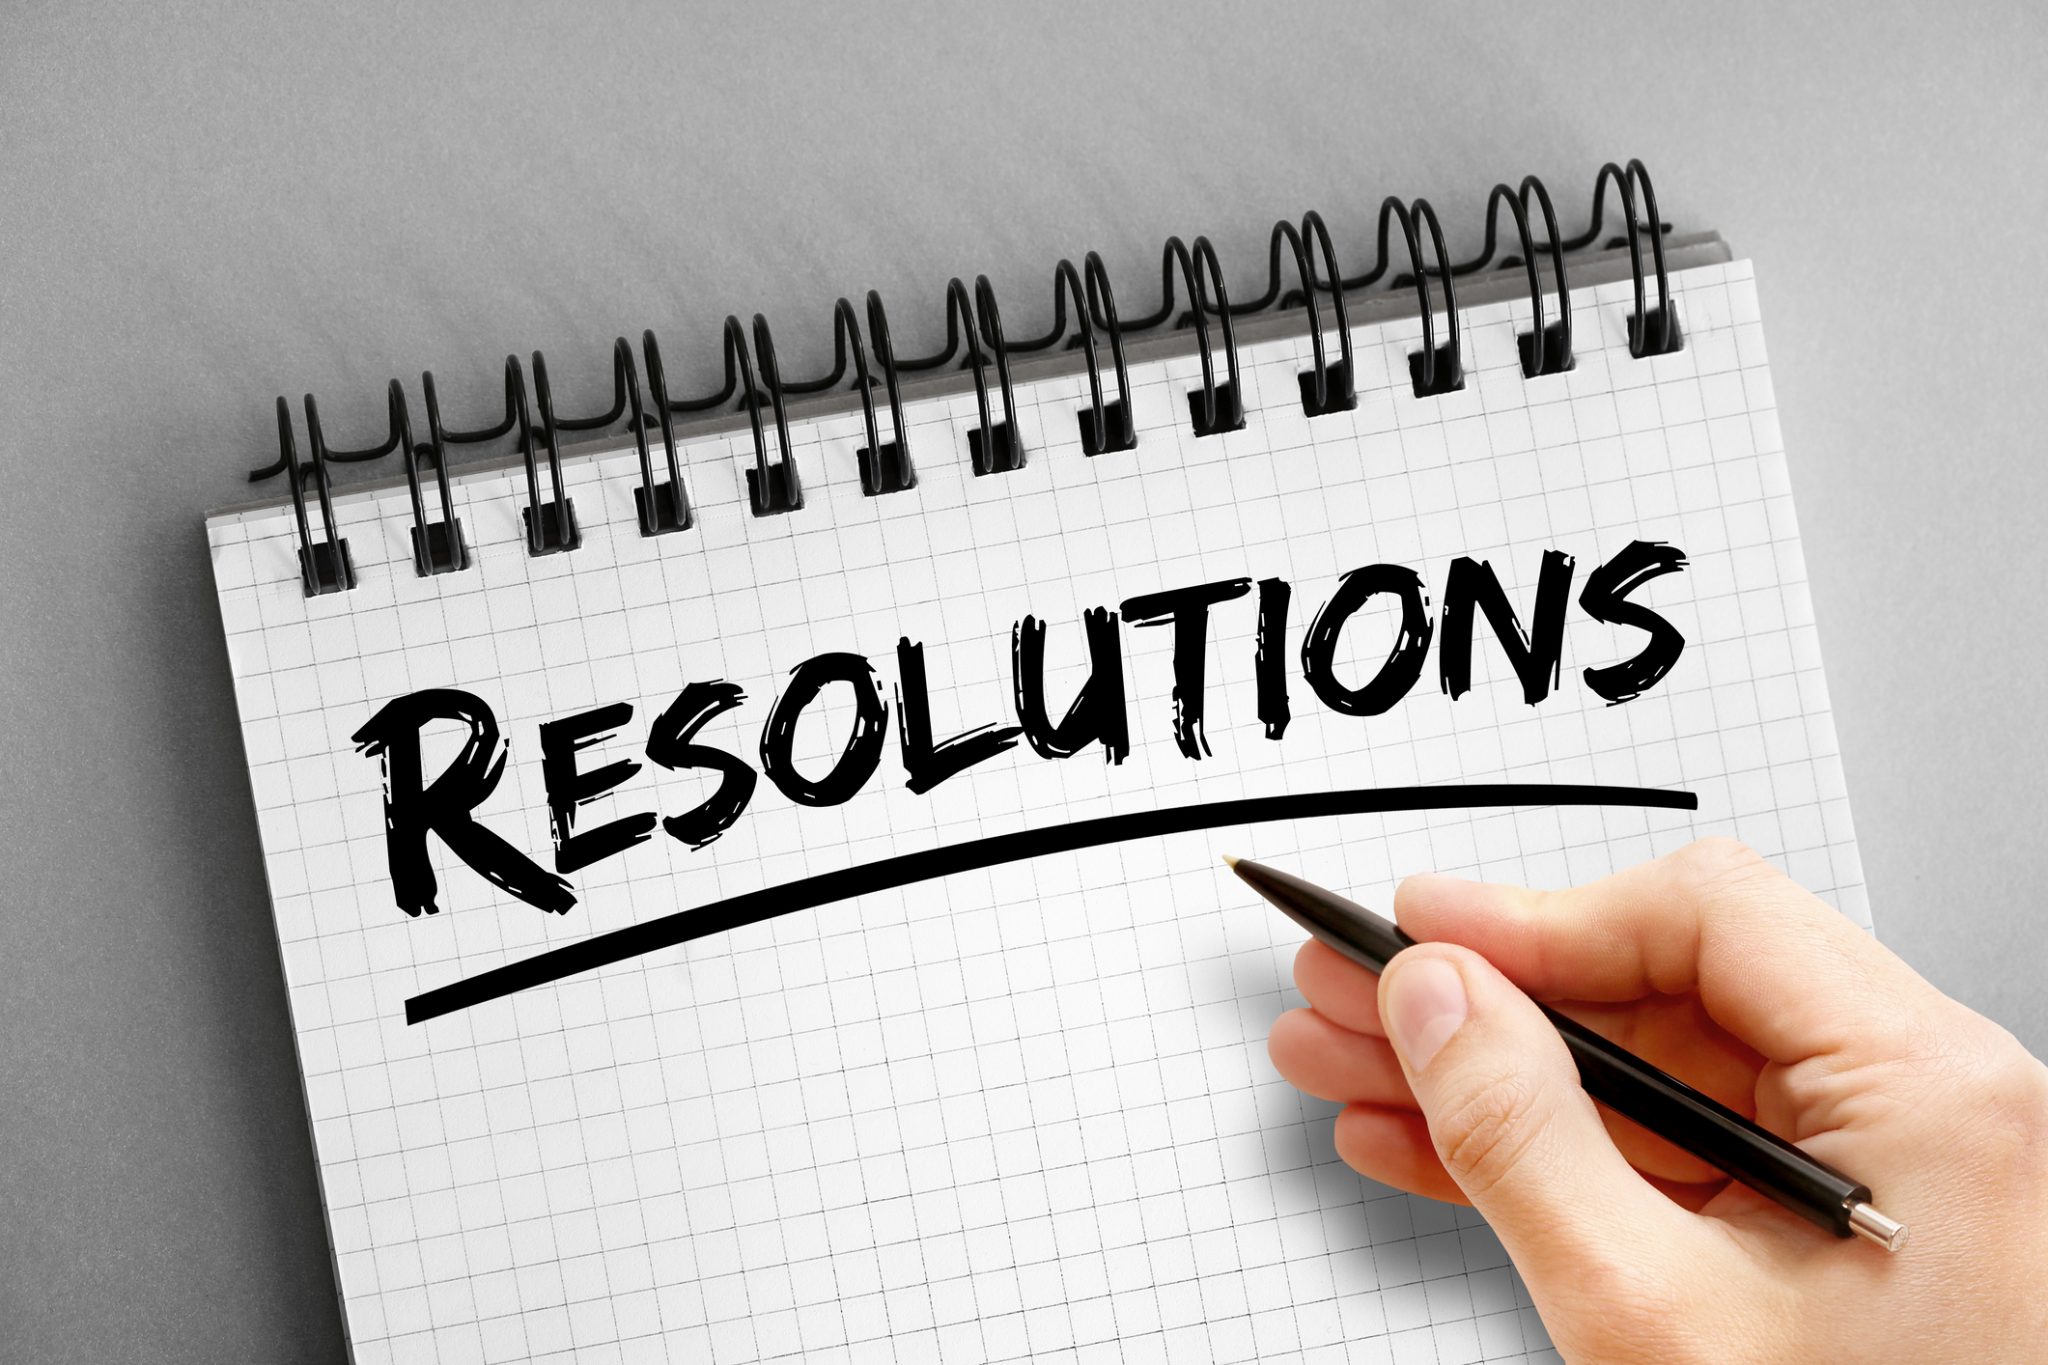 10 Resolutions That Will Increase the Value of Your Company